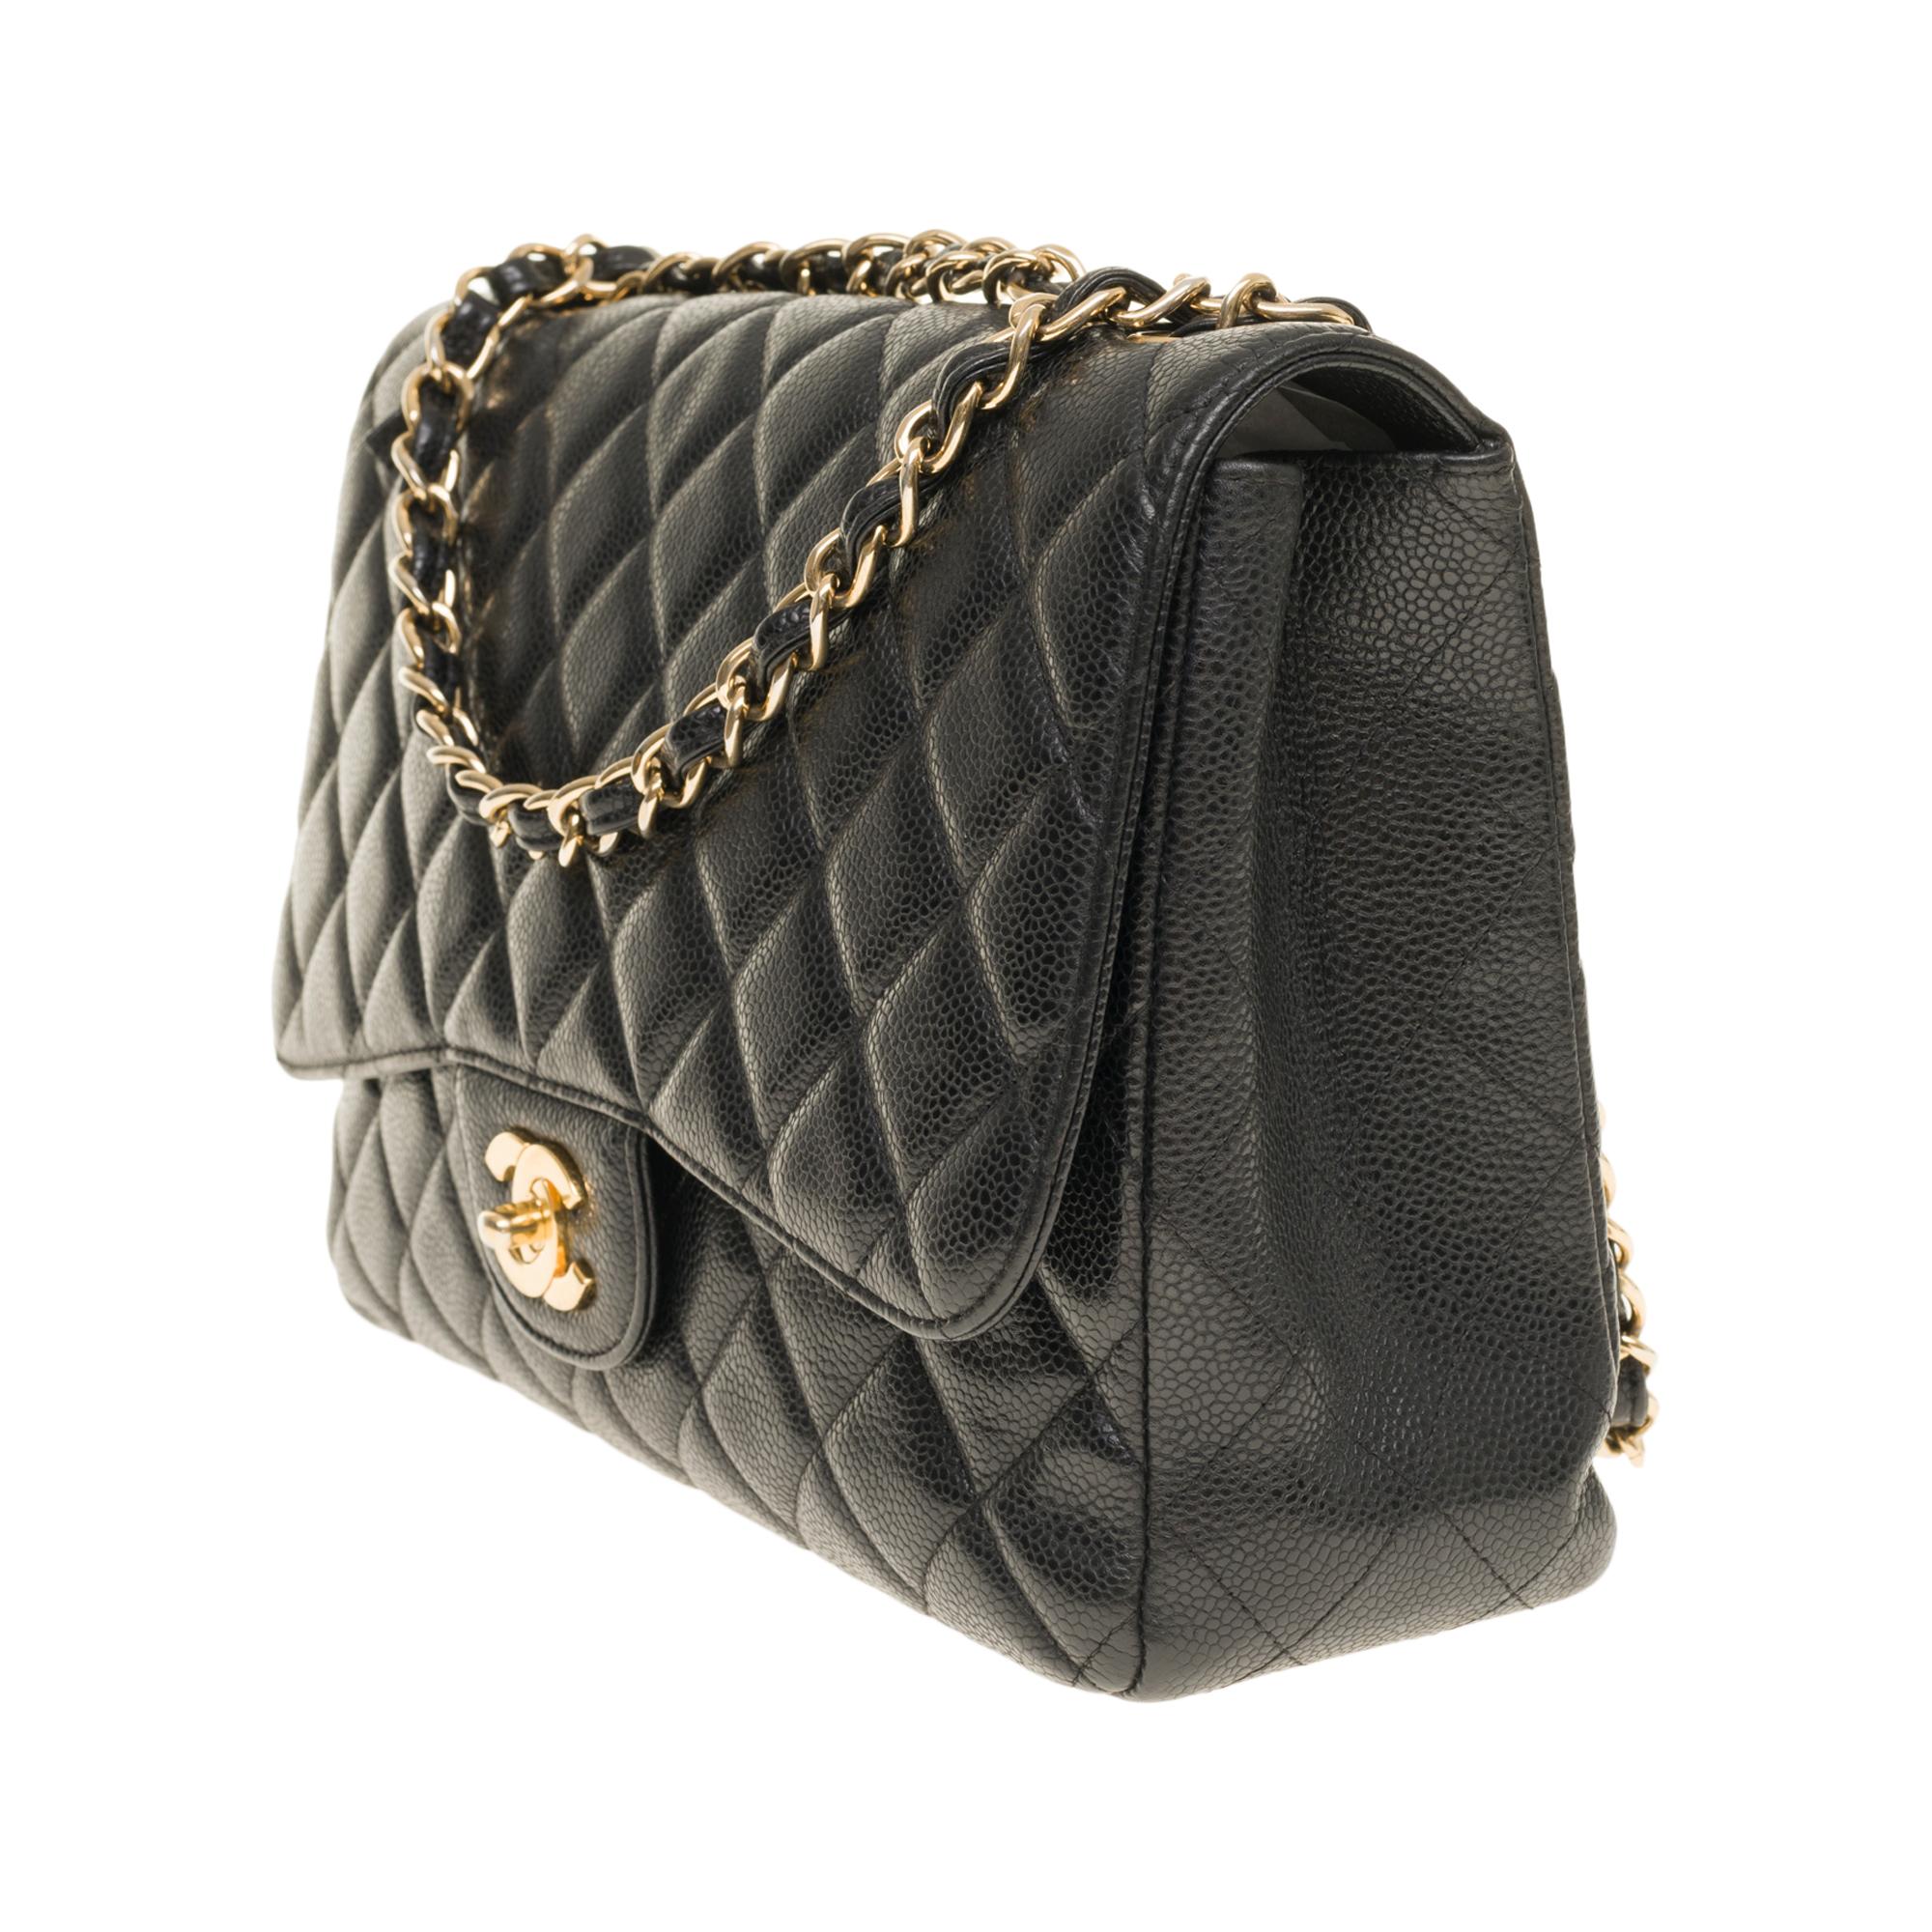 Black Chanel Timeless Jumbo shoulder bag in black quilted caviar leather, GHW